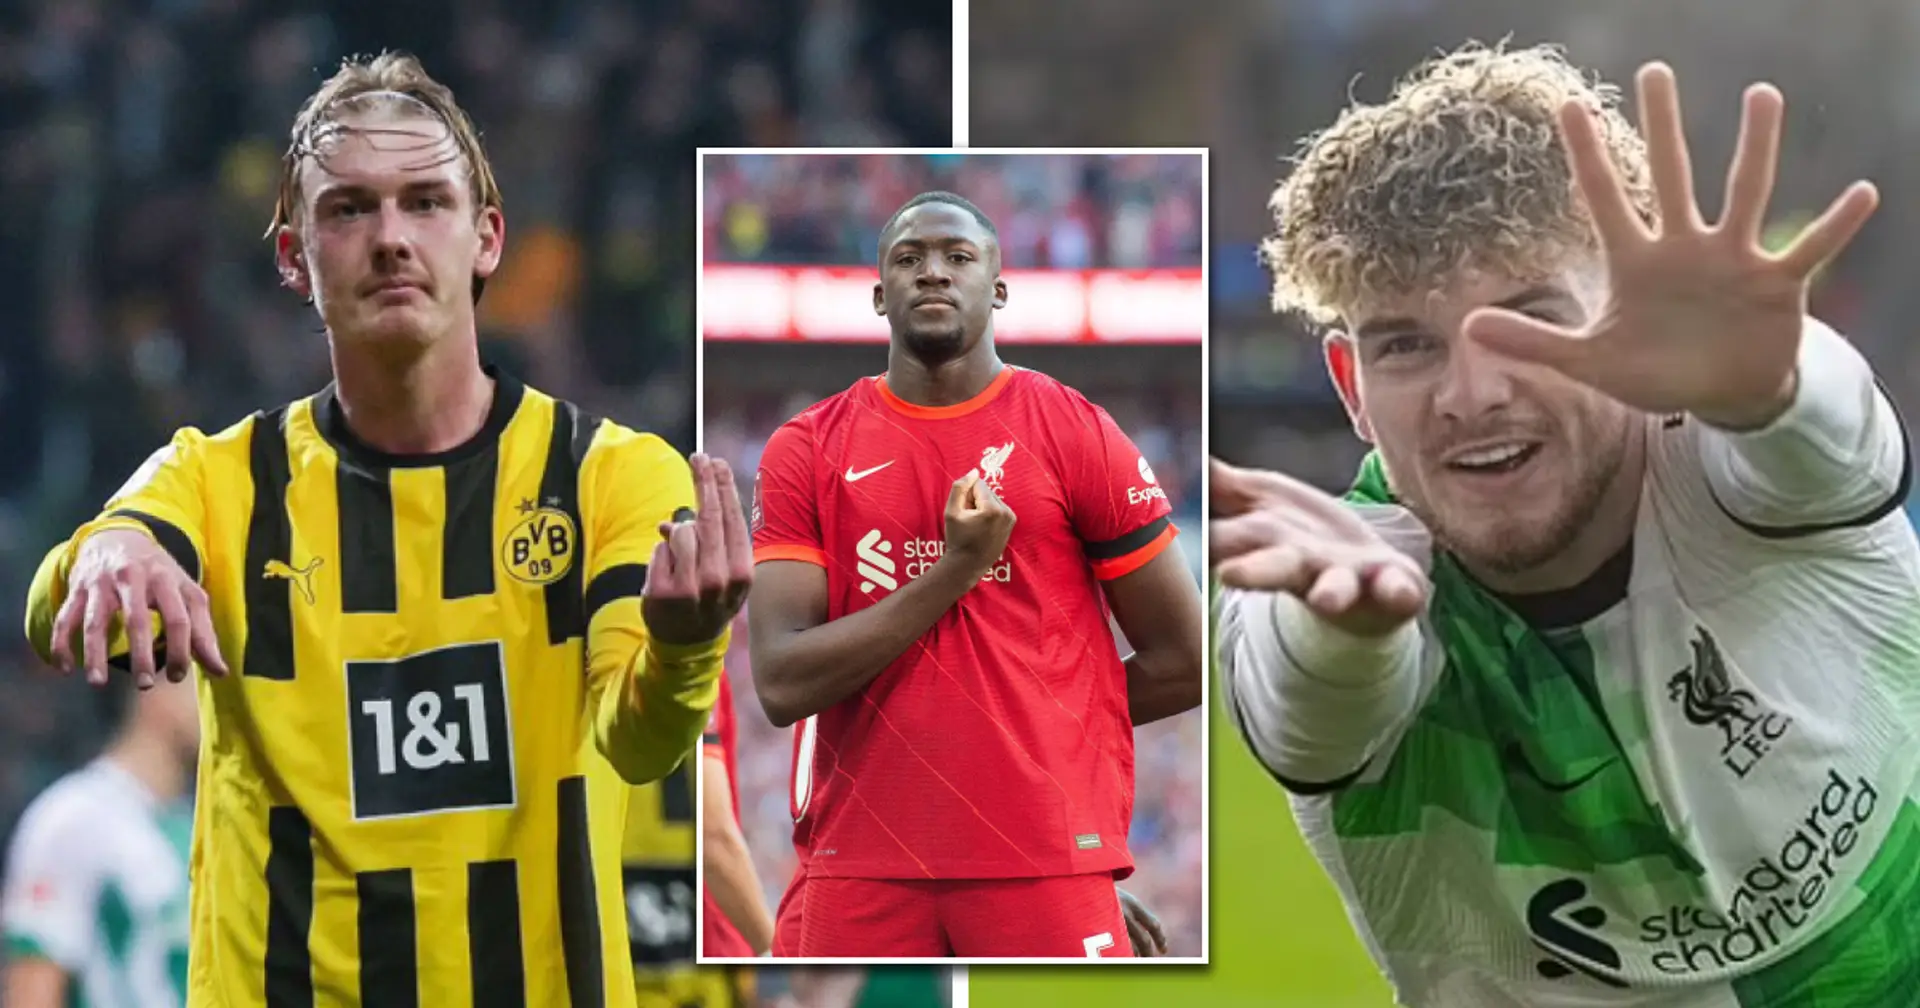 What are these strange football celebrations?